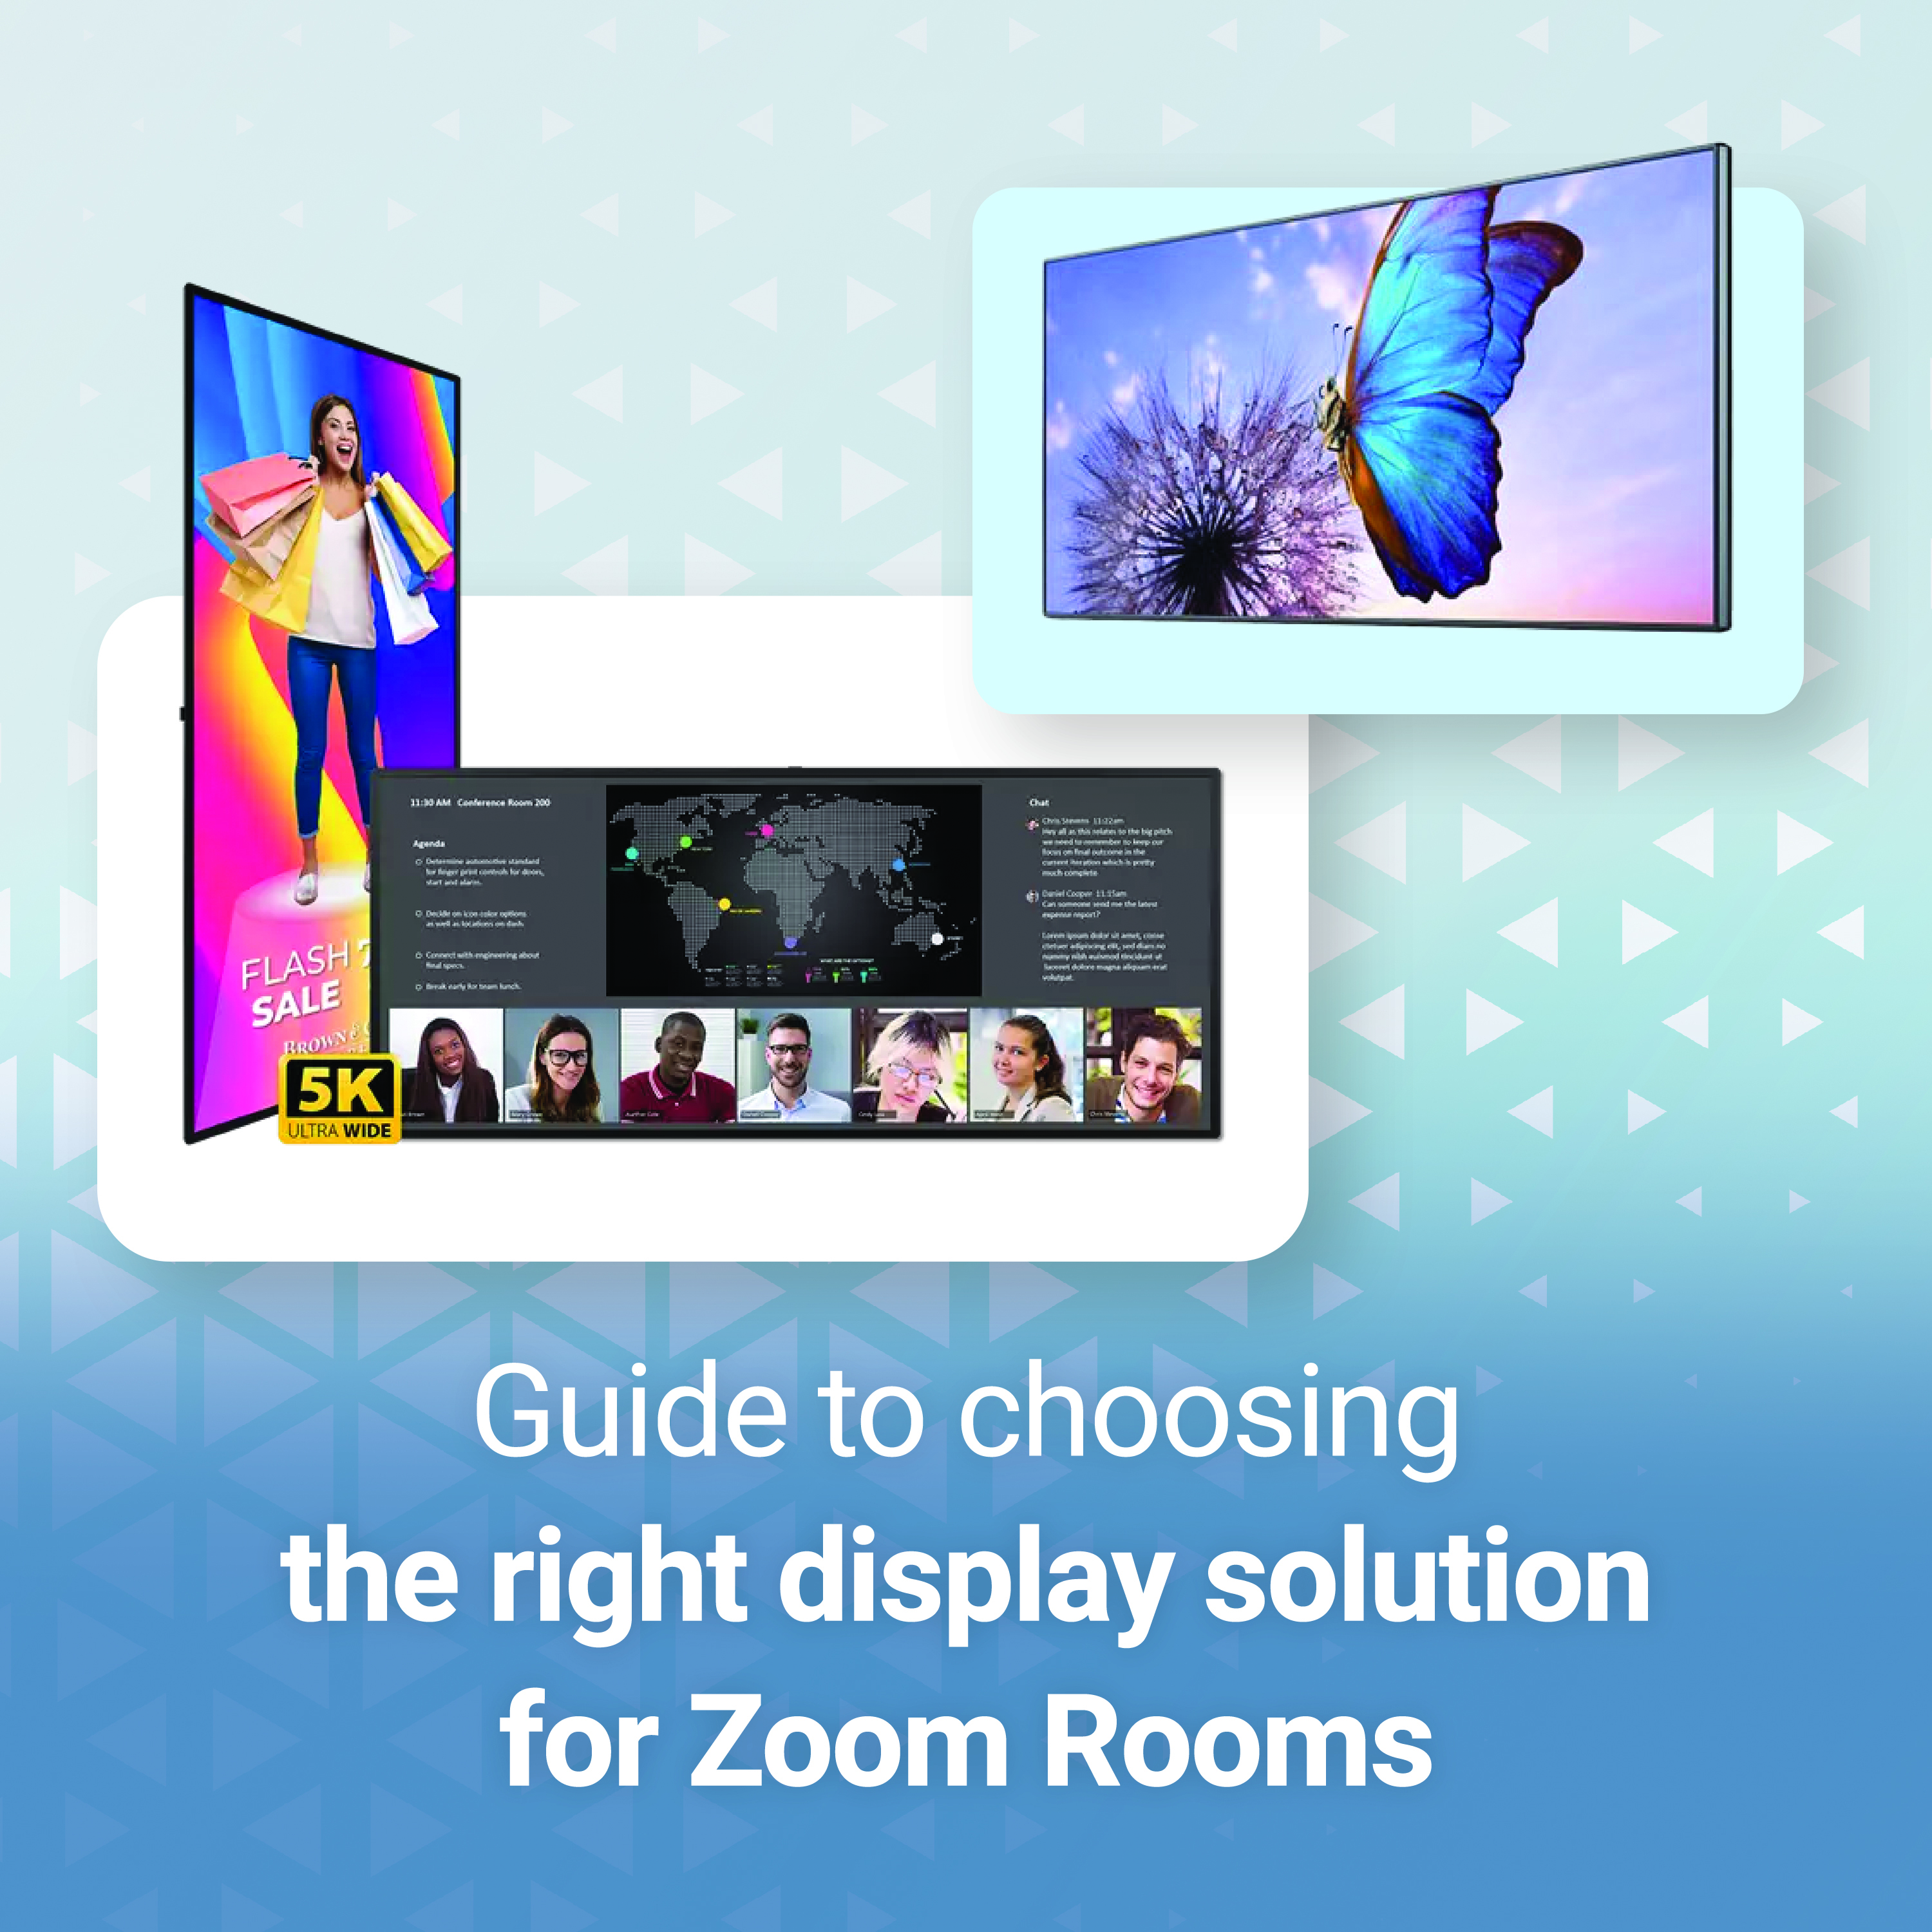 Guide to Choosing the Right Display Solution for Zoom Rooms